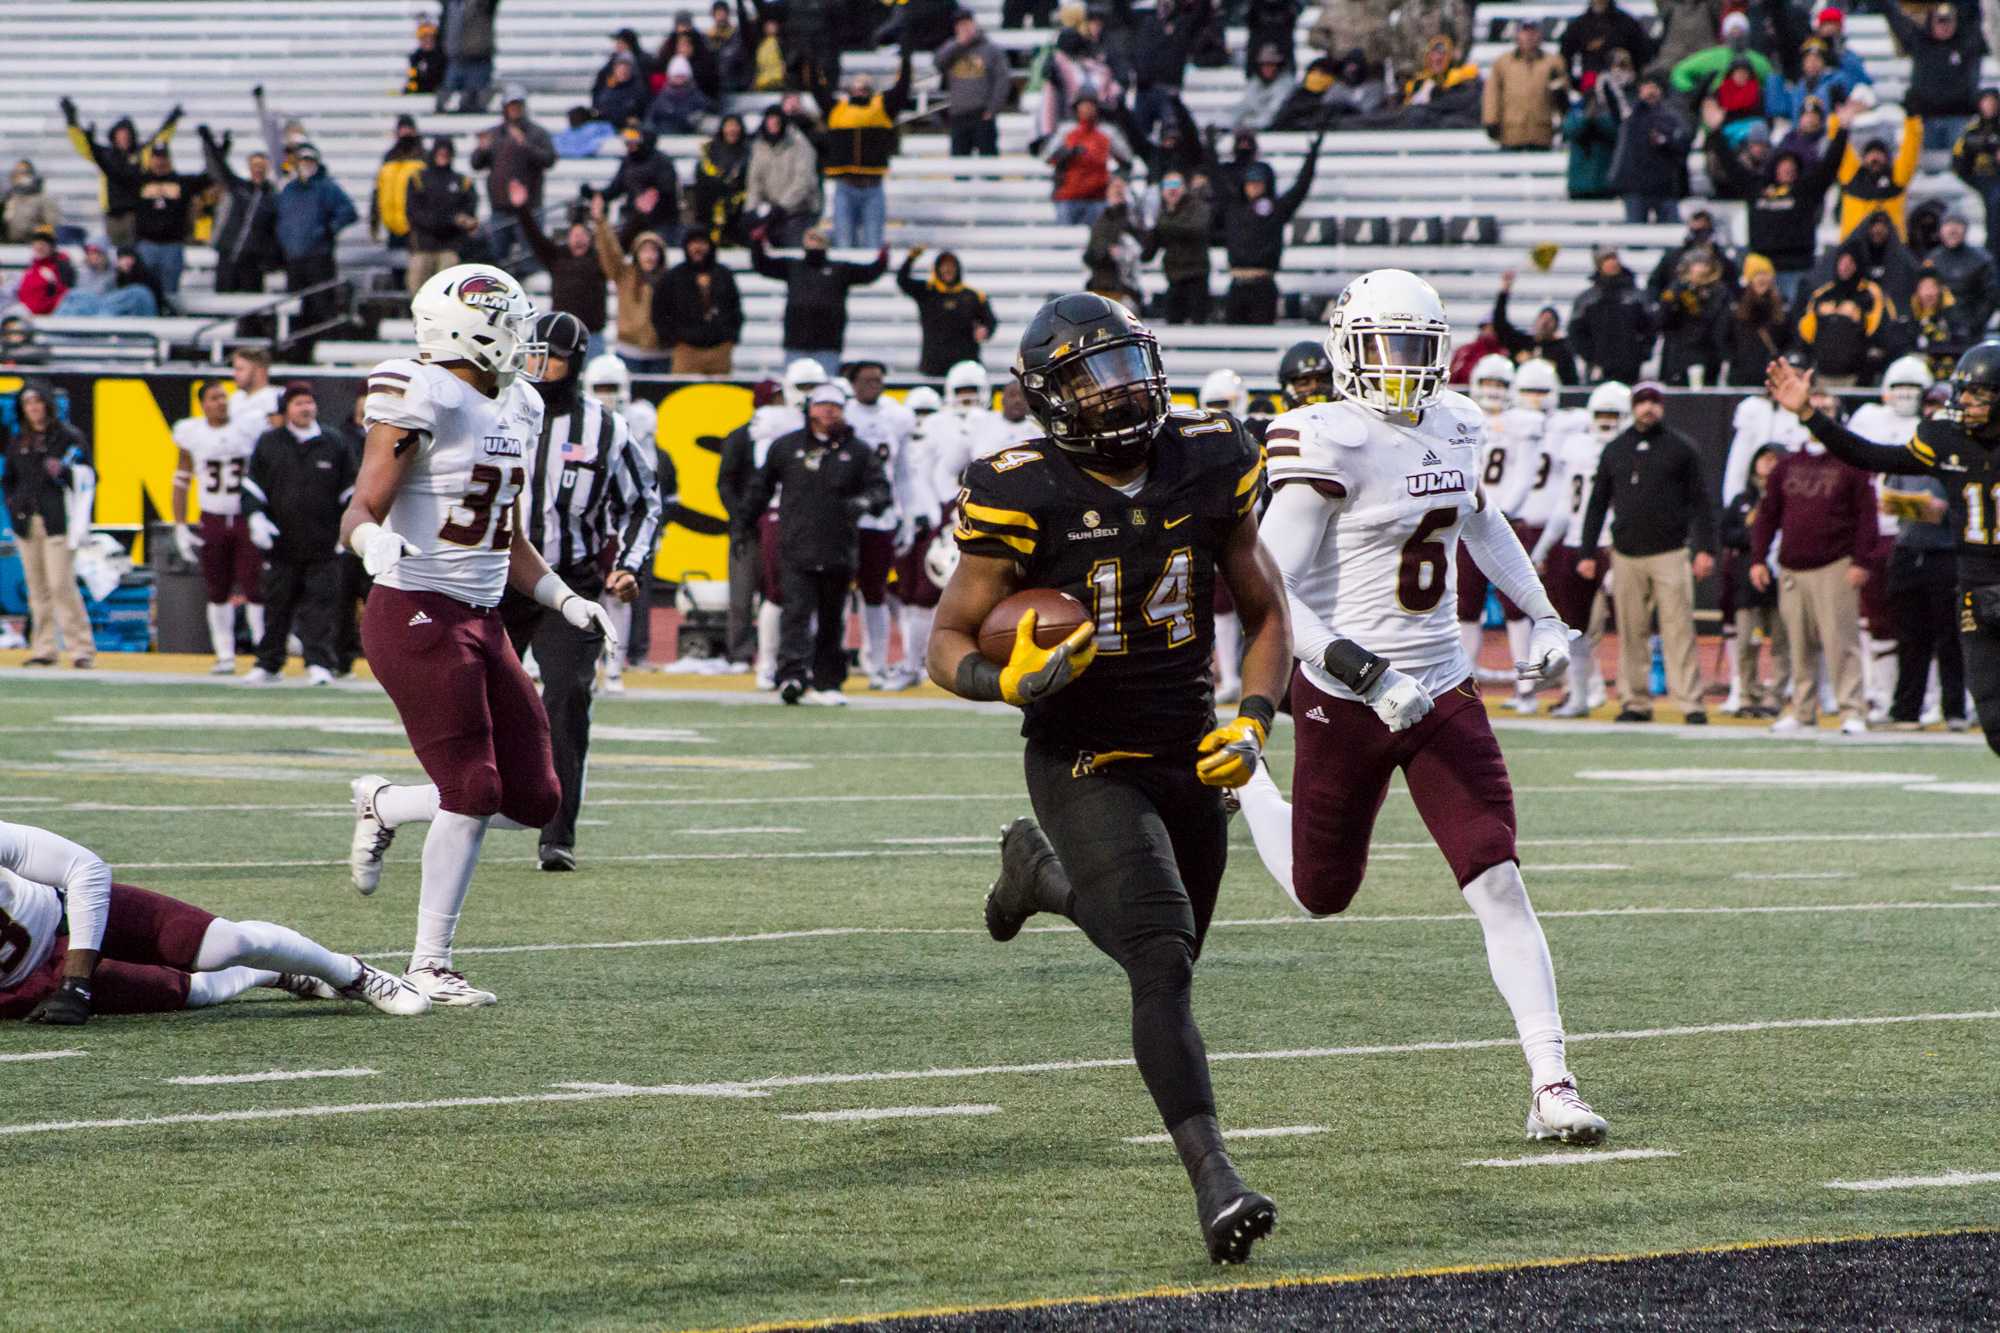 Senior Running Back, Marcus Cox, scores a touchdown during the game against Monroe. He is now Appalachian States all time leading rusher.